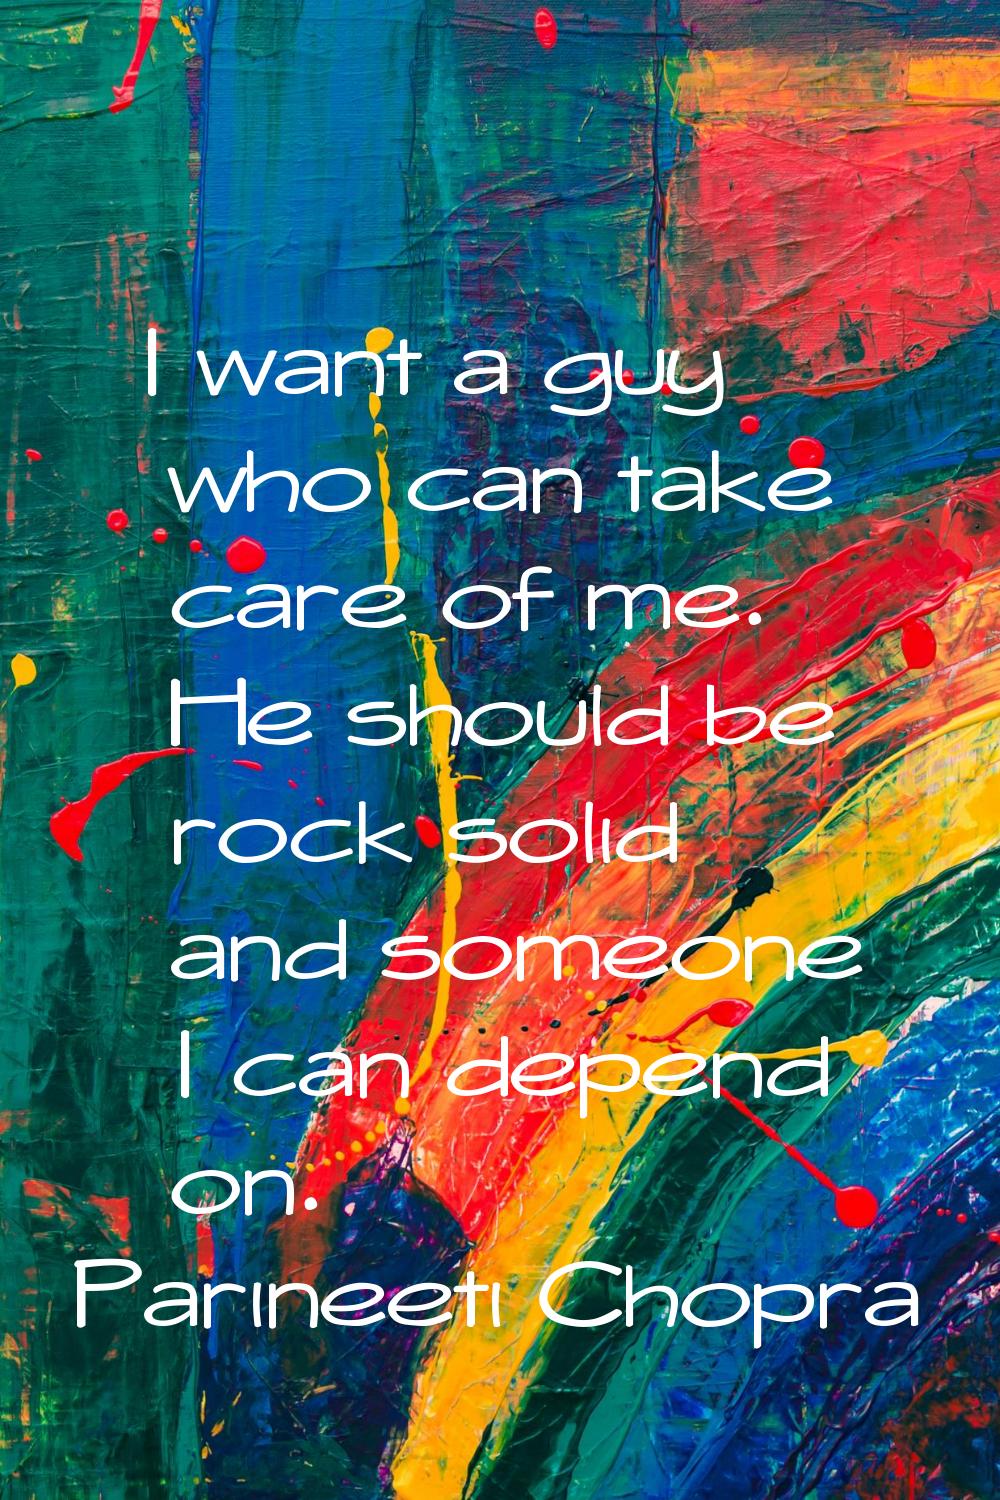 I want a guy who can take care of me. He should be rock solid and someone I can depend on.